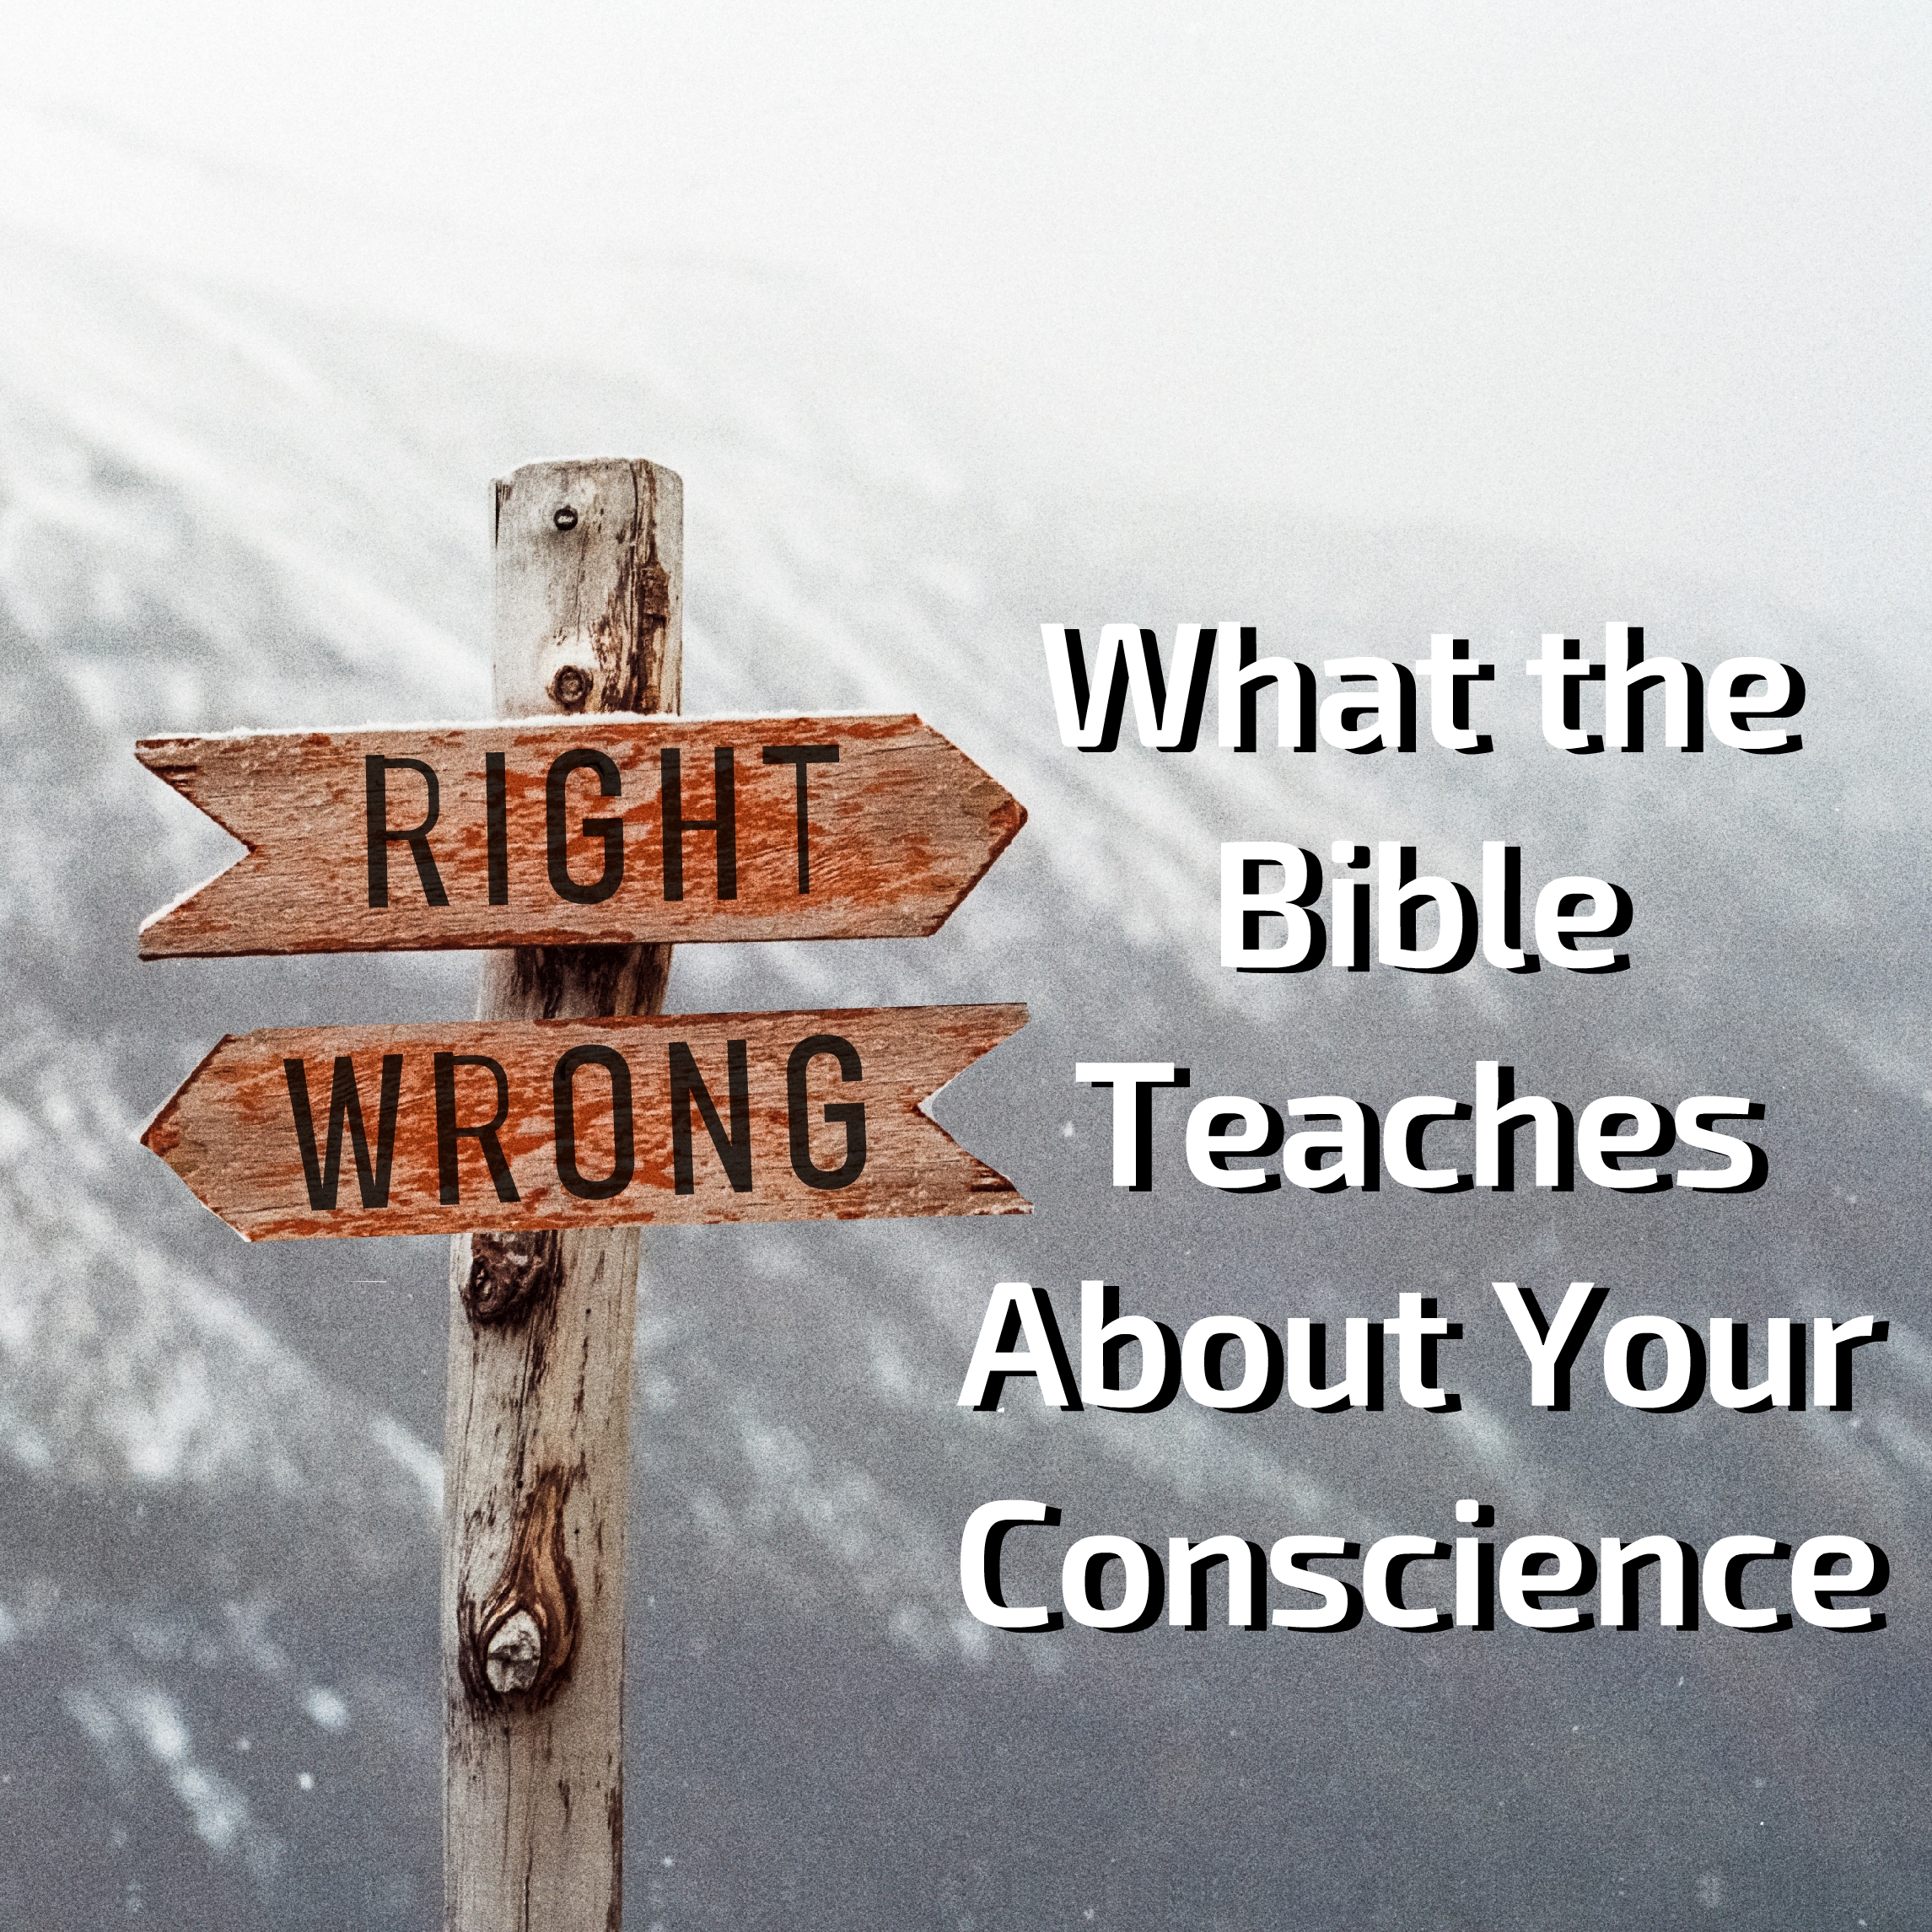 Right and Wrong: What the Bible Teaches About Your Conscience